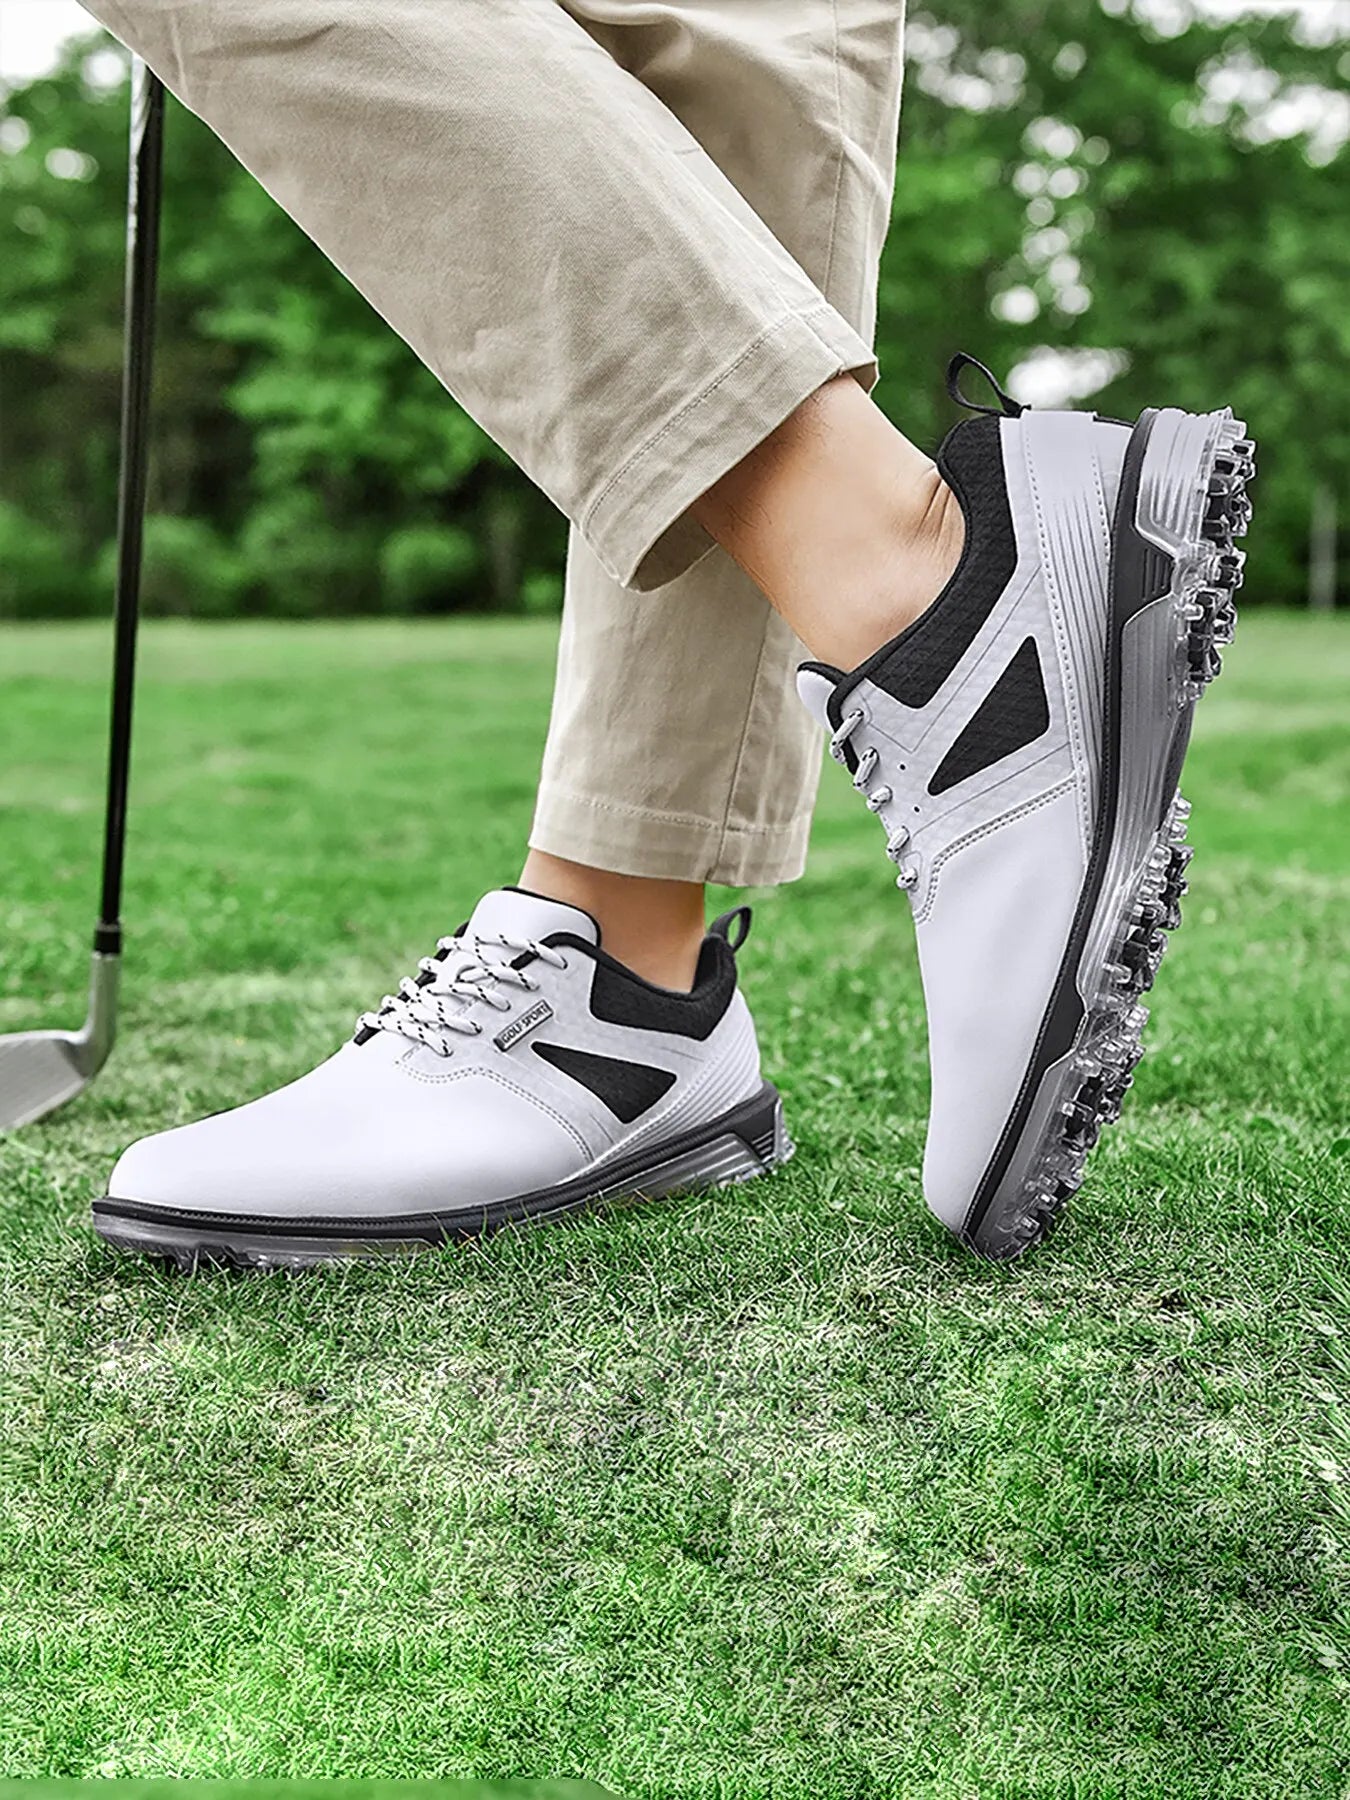 Professional 9-Spike Golf Shoes for Men